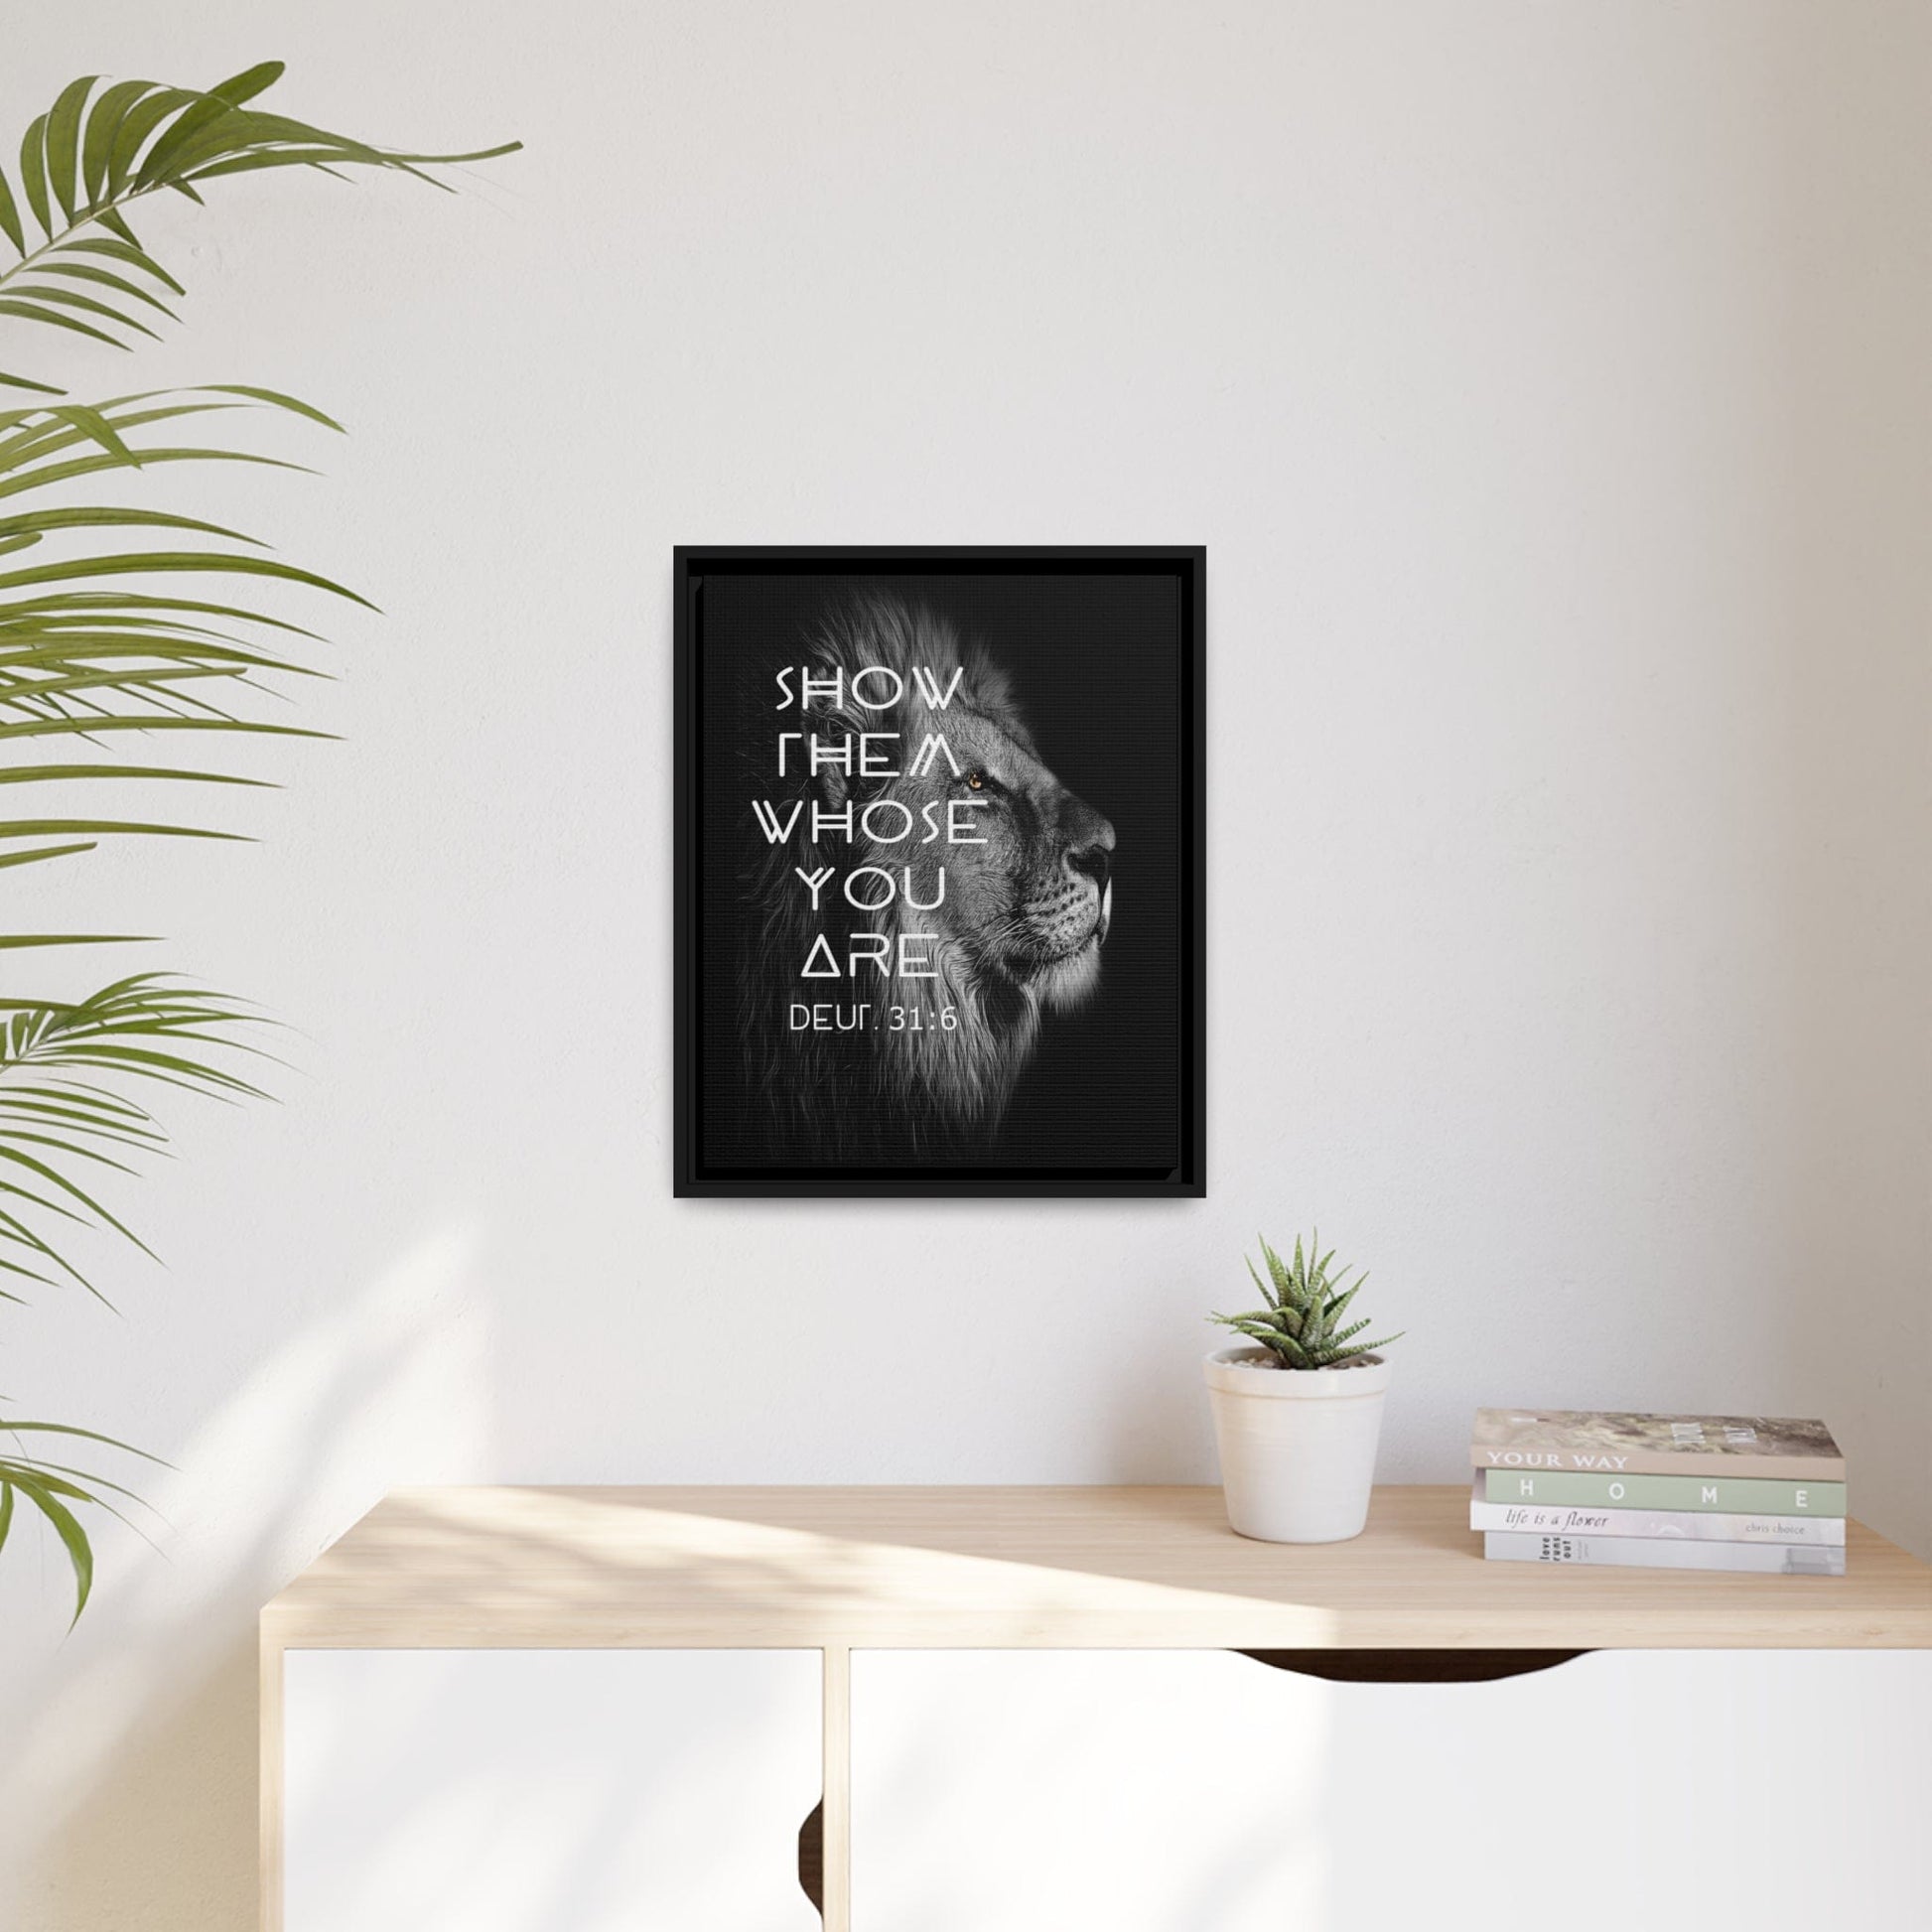 Printify Canvas Show Them Whose You Are - Deuteronomy 31:6 Christian Canvas Wall Art